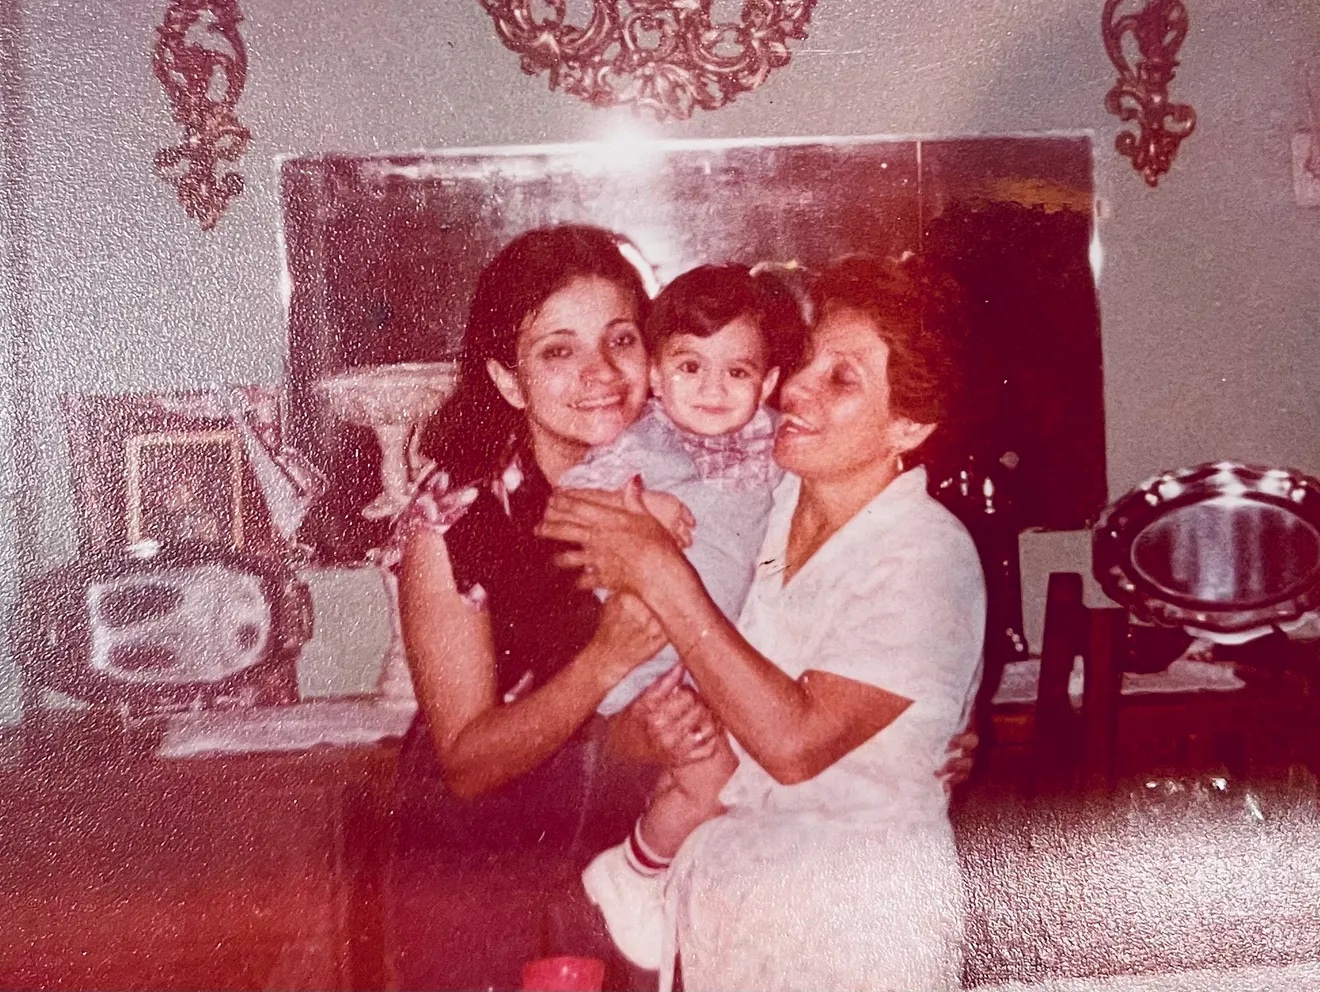 Agustin with his mother and his grandmother. Courtesy of Rafael Agustin